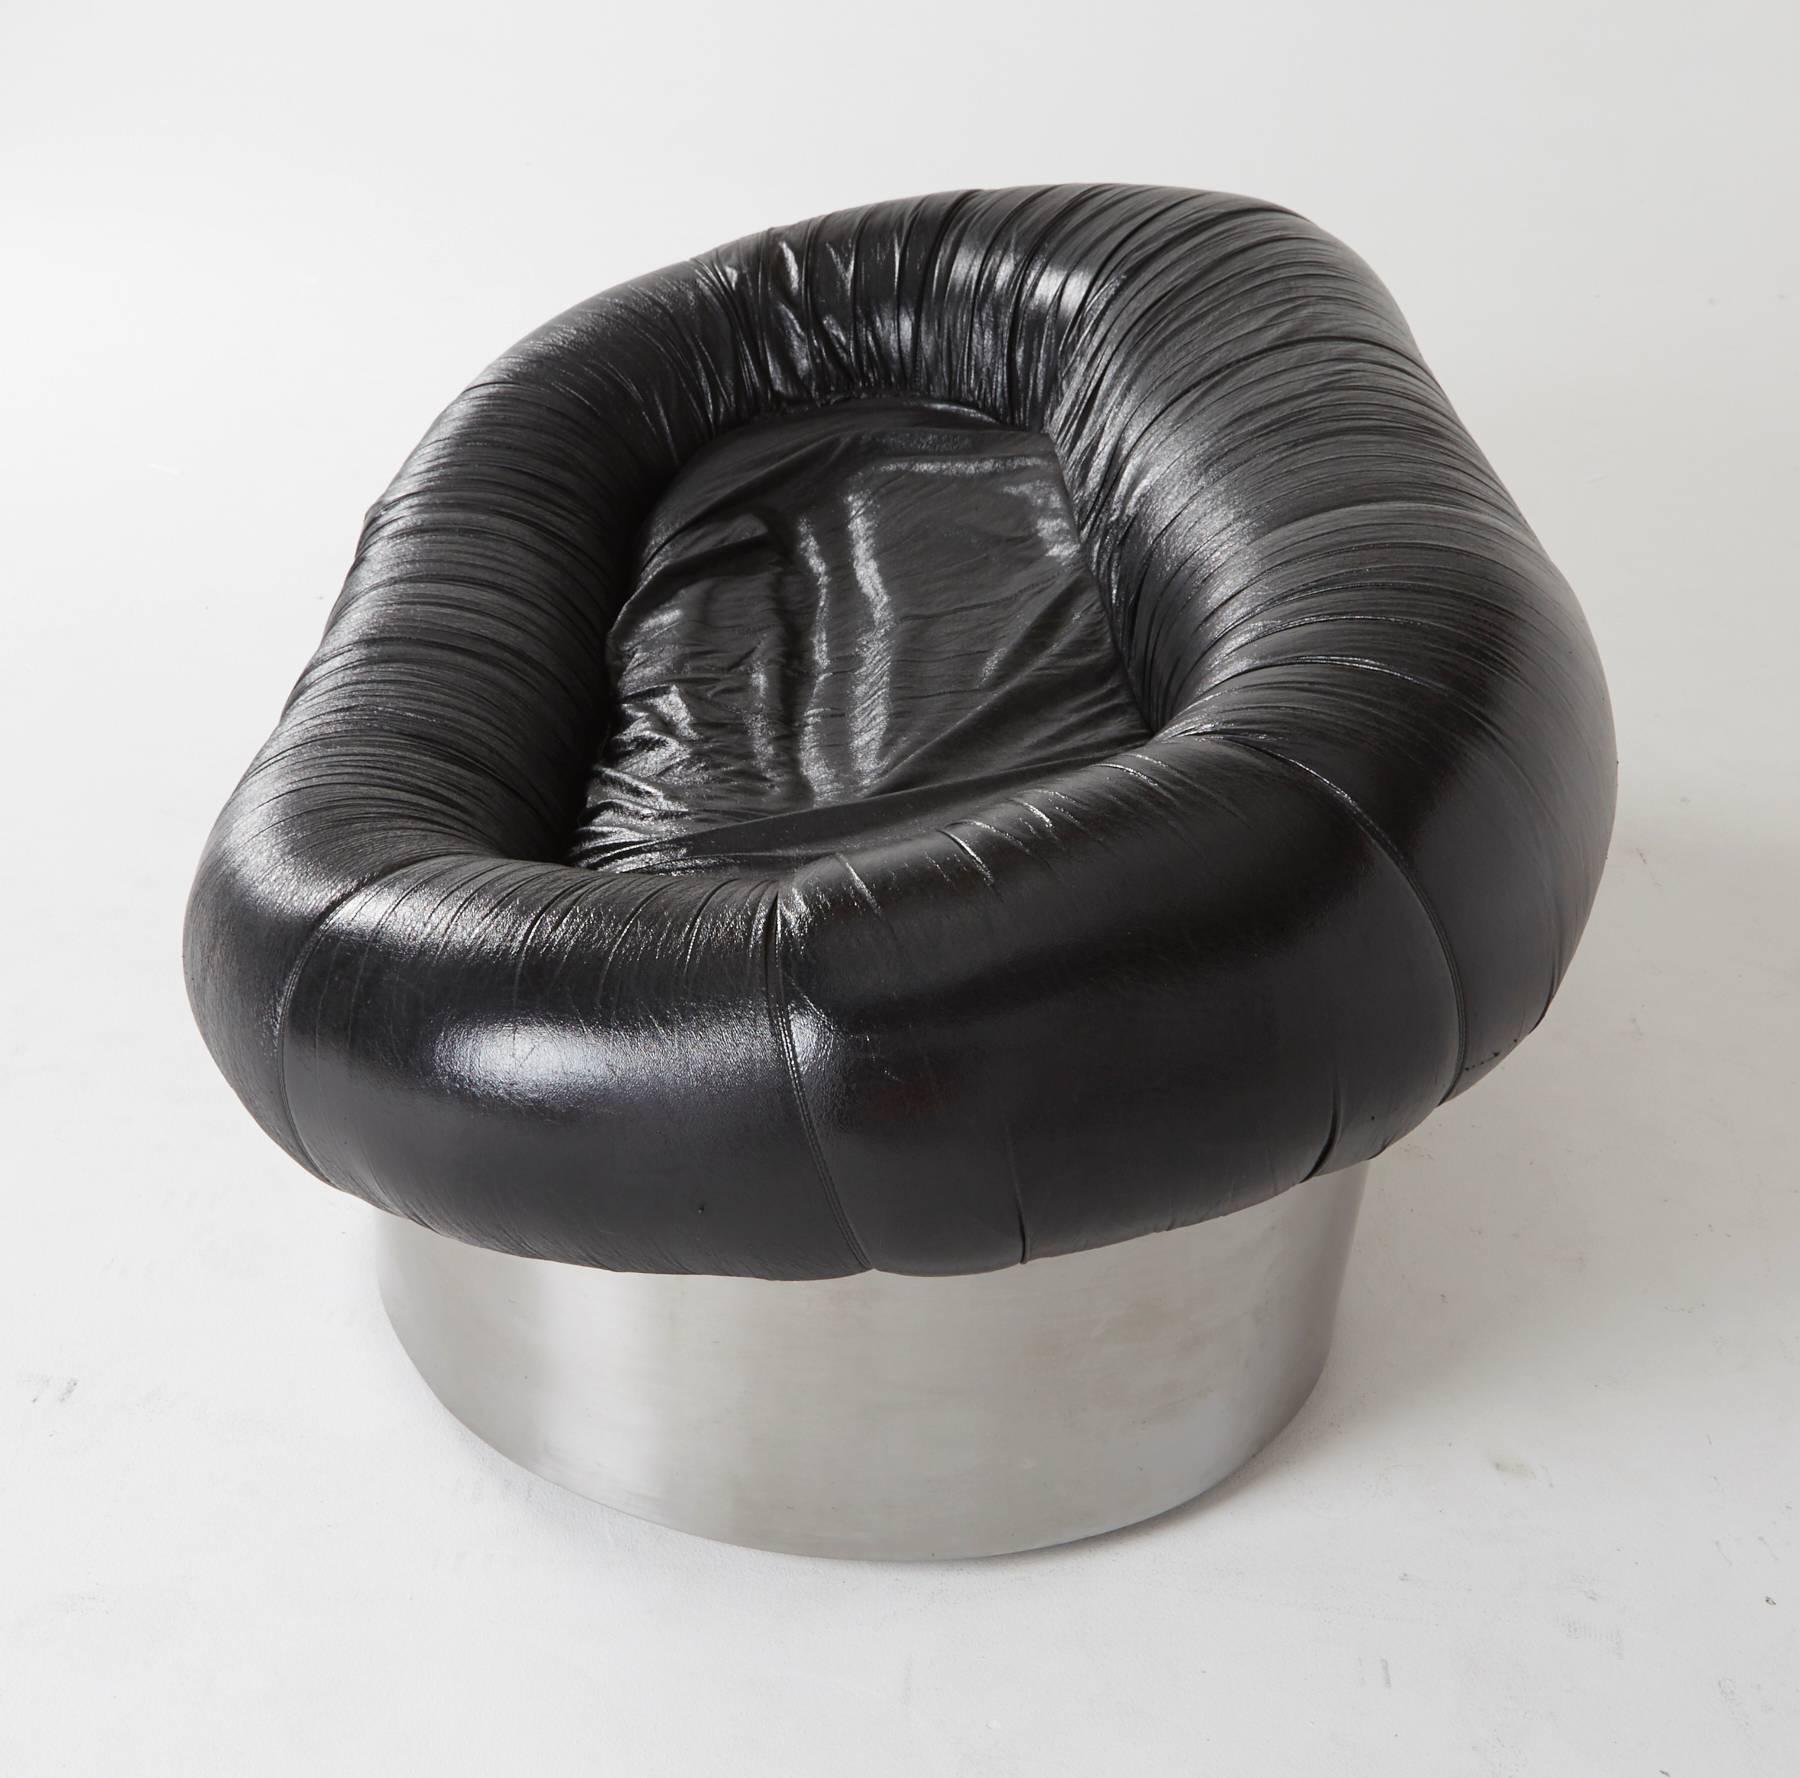 An extraordinary sofa by acclaimed Italian designer Antonello Mosca. Mounted on a stainless steel base, the black leatherette loveseat is comfortably encased by a tubular cushion. Of the biomorphic mid to Postmodern era, this supremely cool sofa